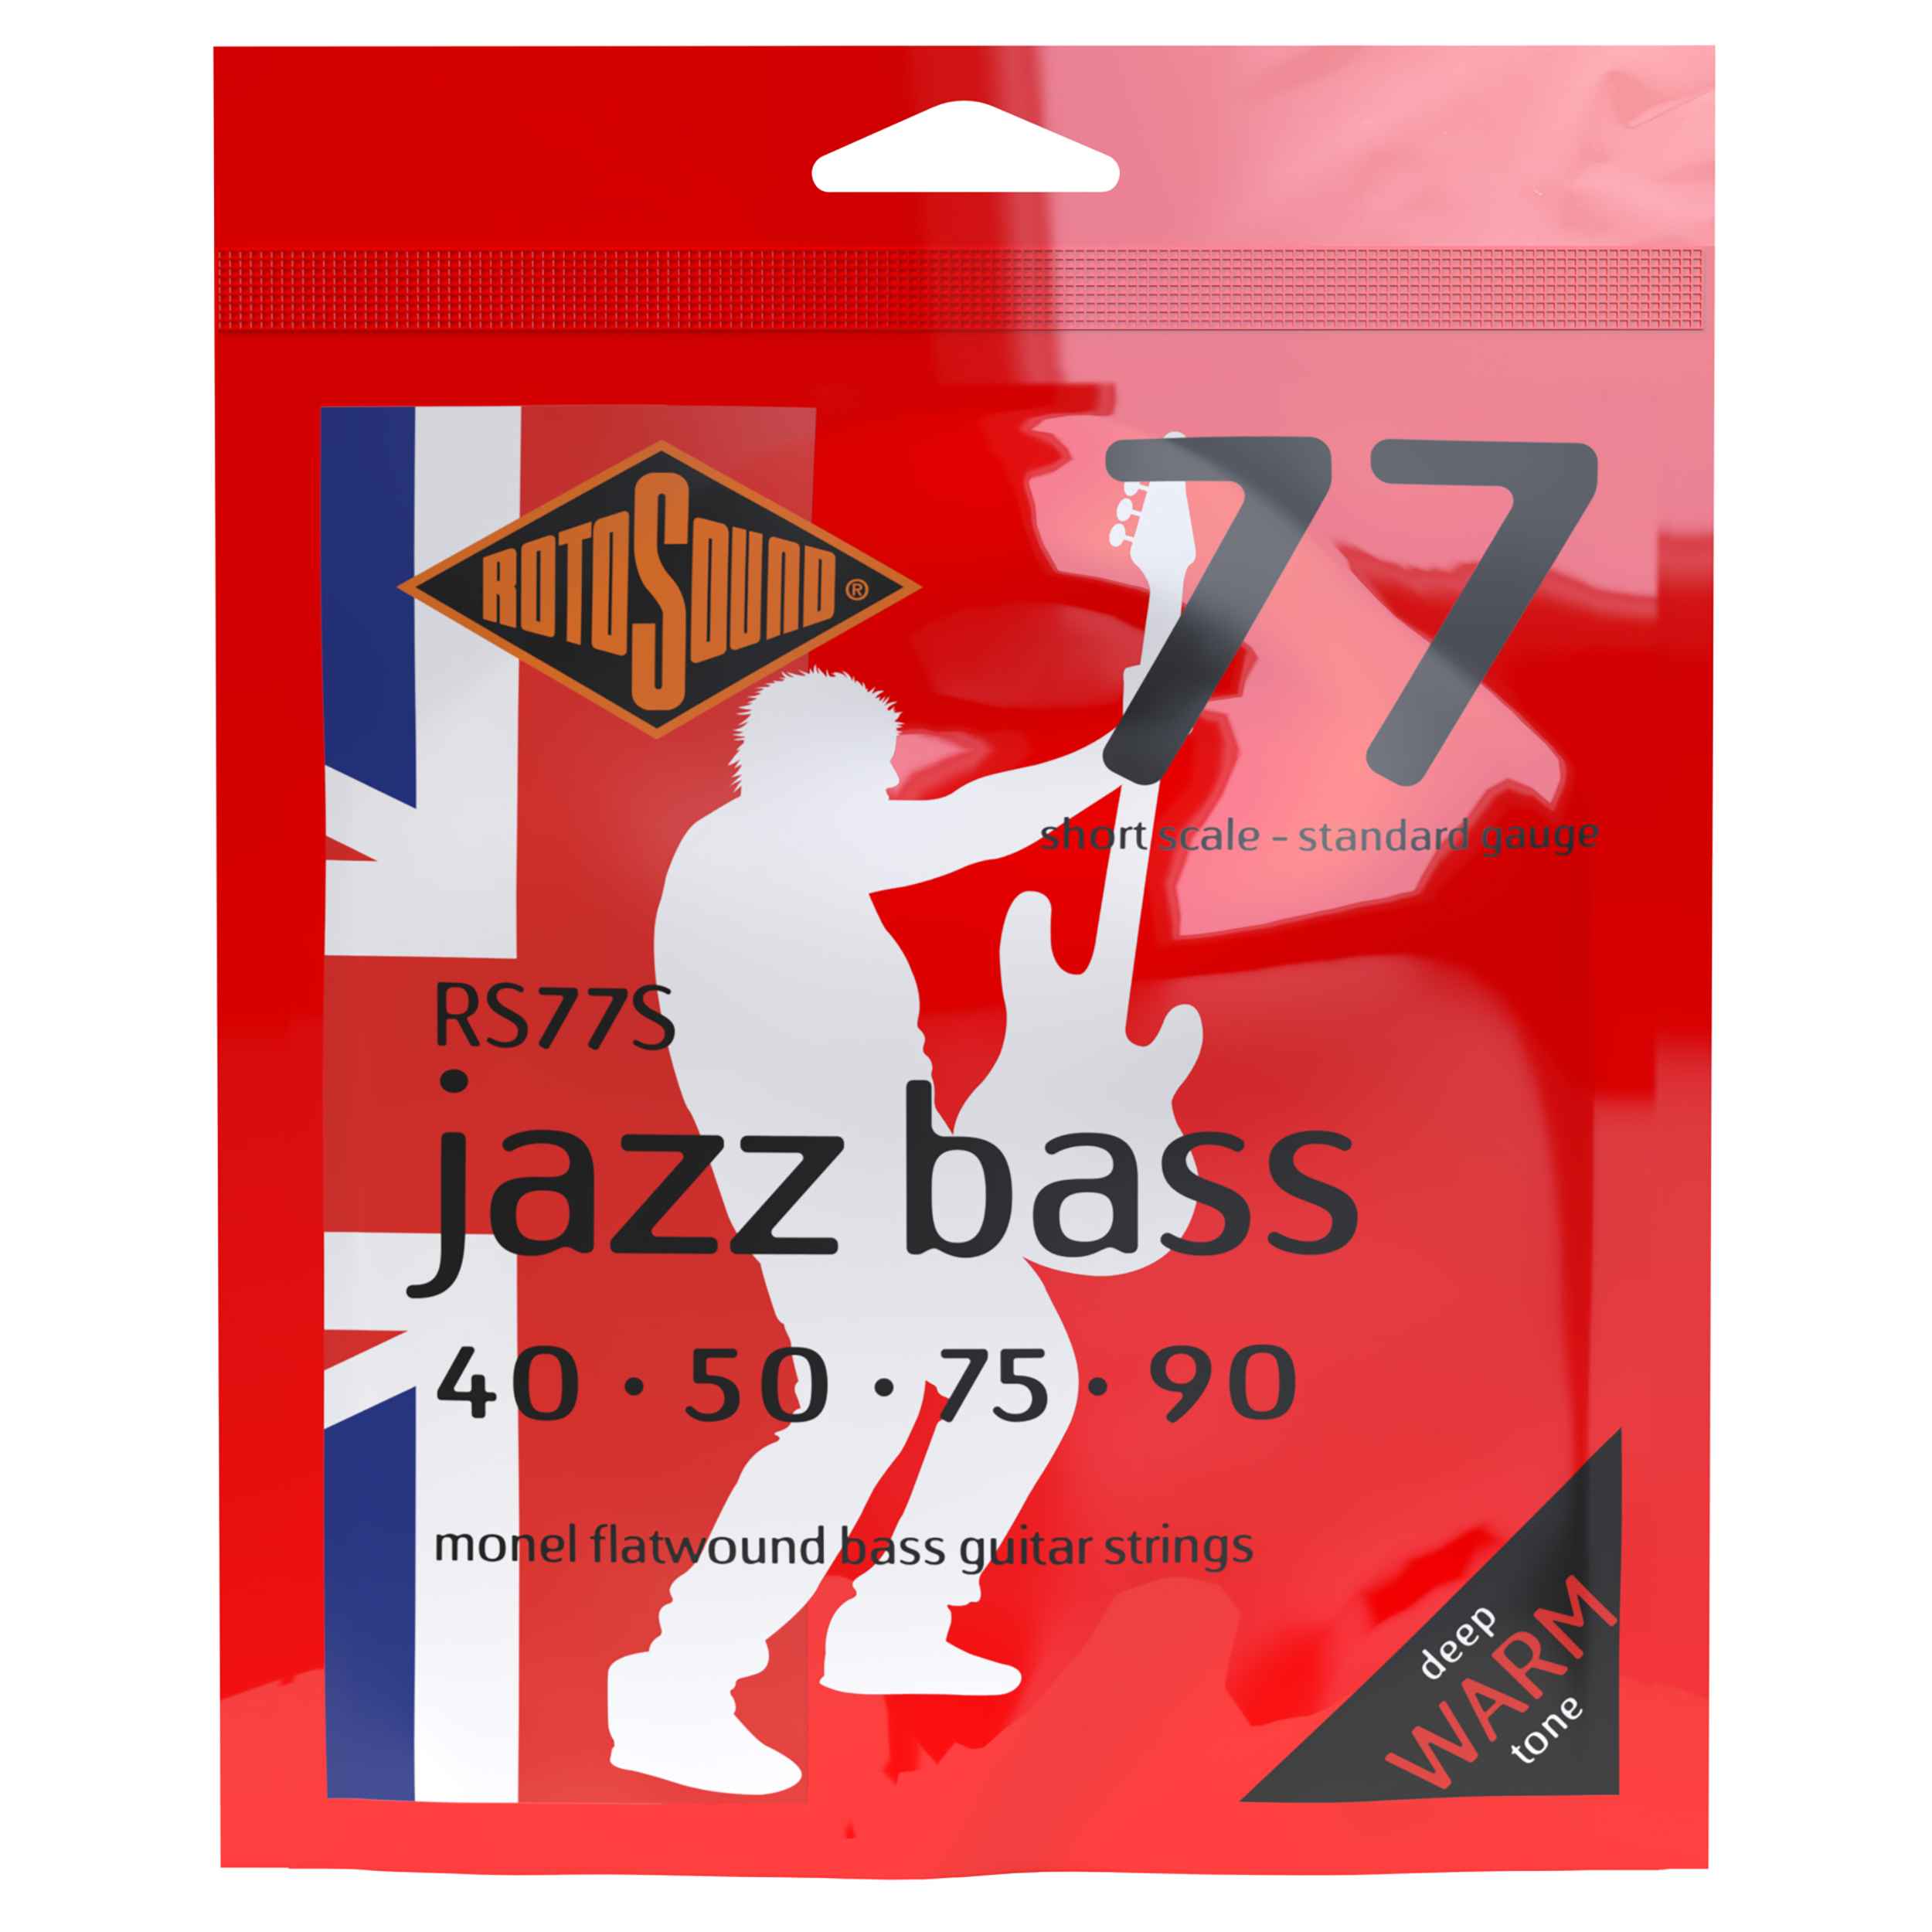 77　40-90　BASS　SCALE　JAZZ　SHORT　RS77S　ROTOSOUND　エレキベース弦-